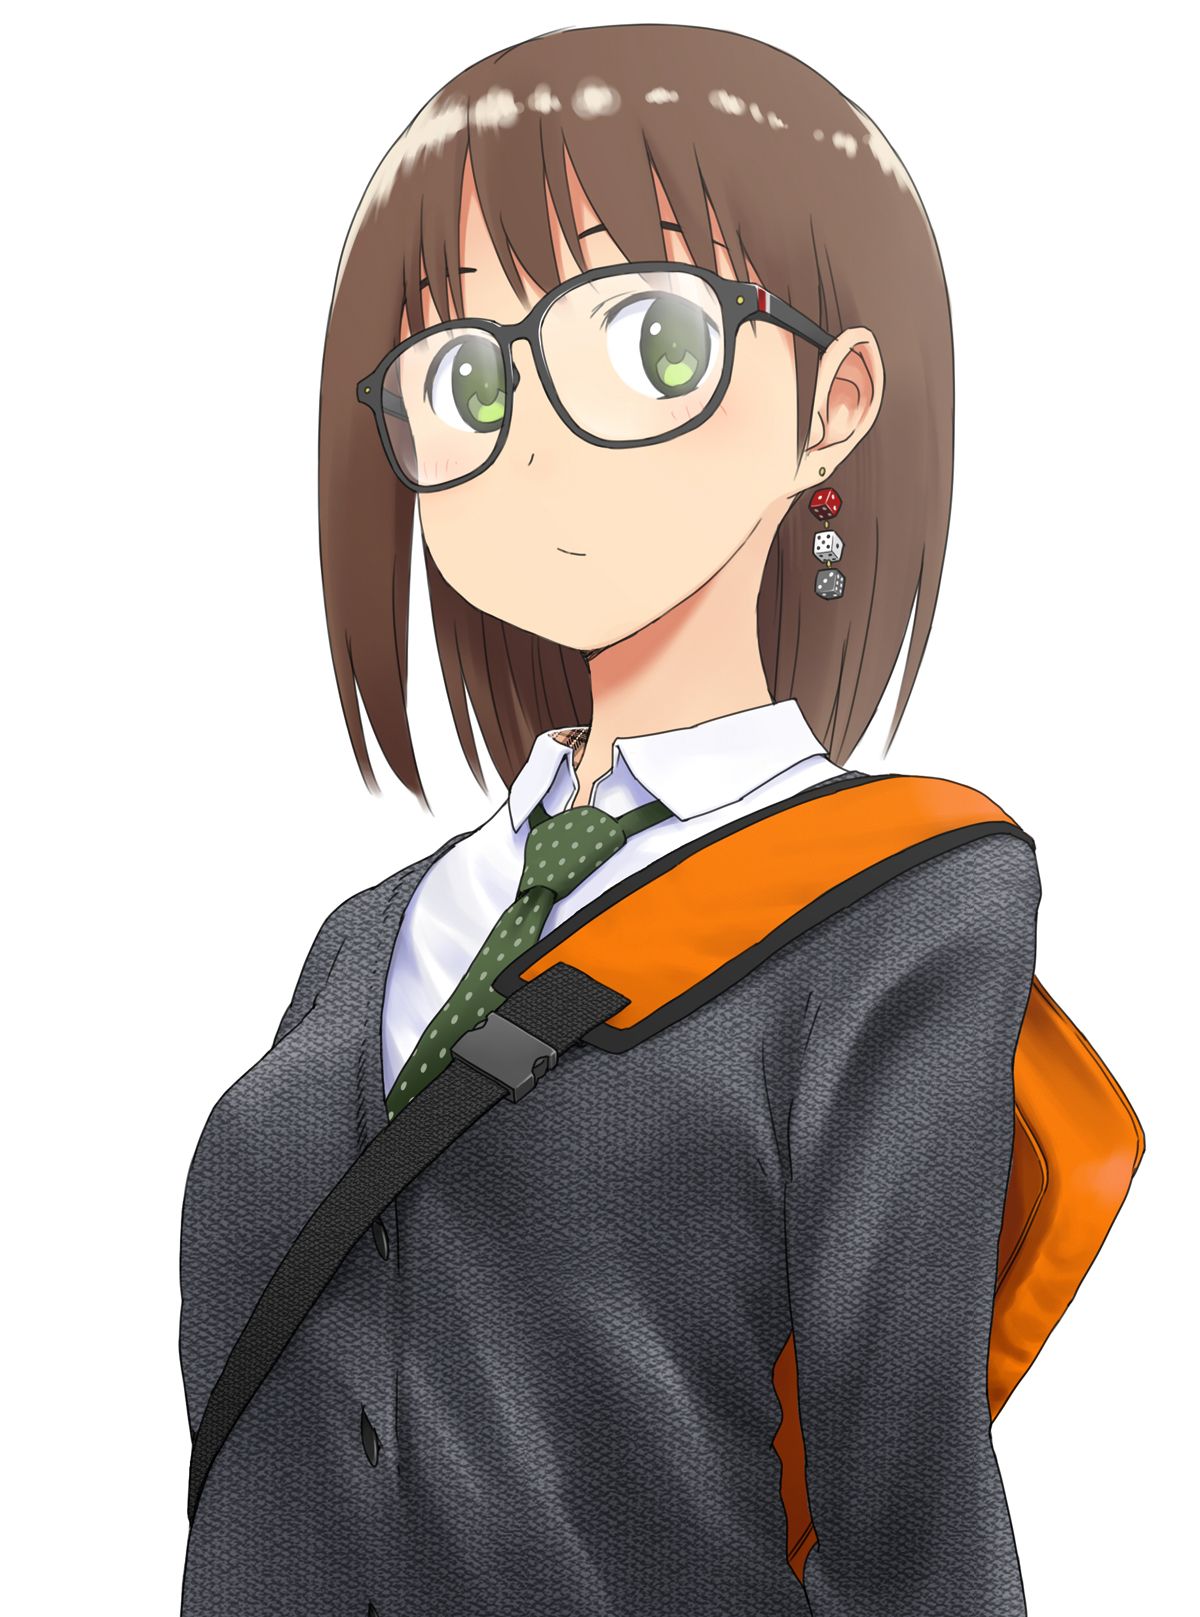 Anime Girl With Round Glasses Maxipx